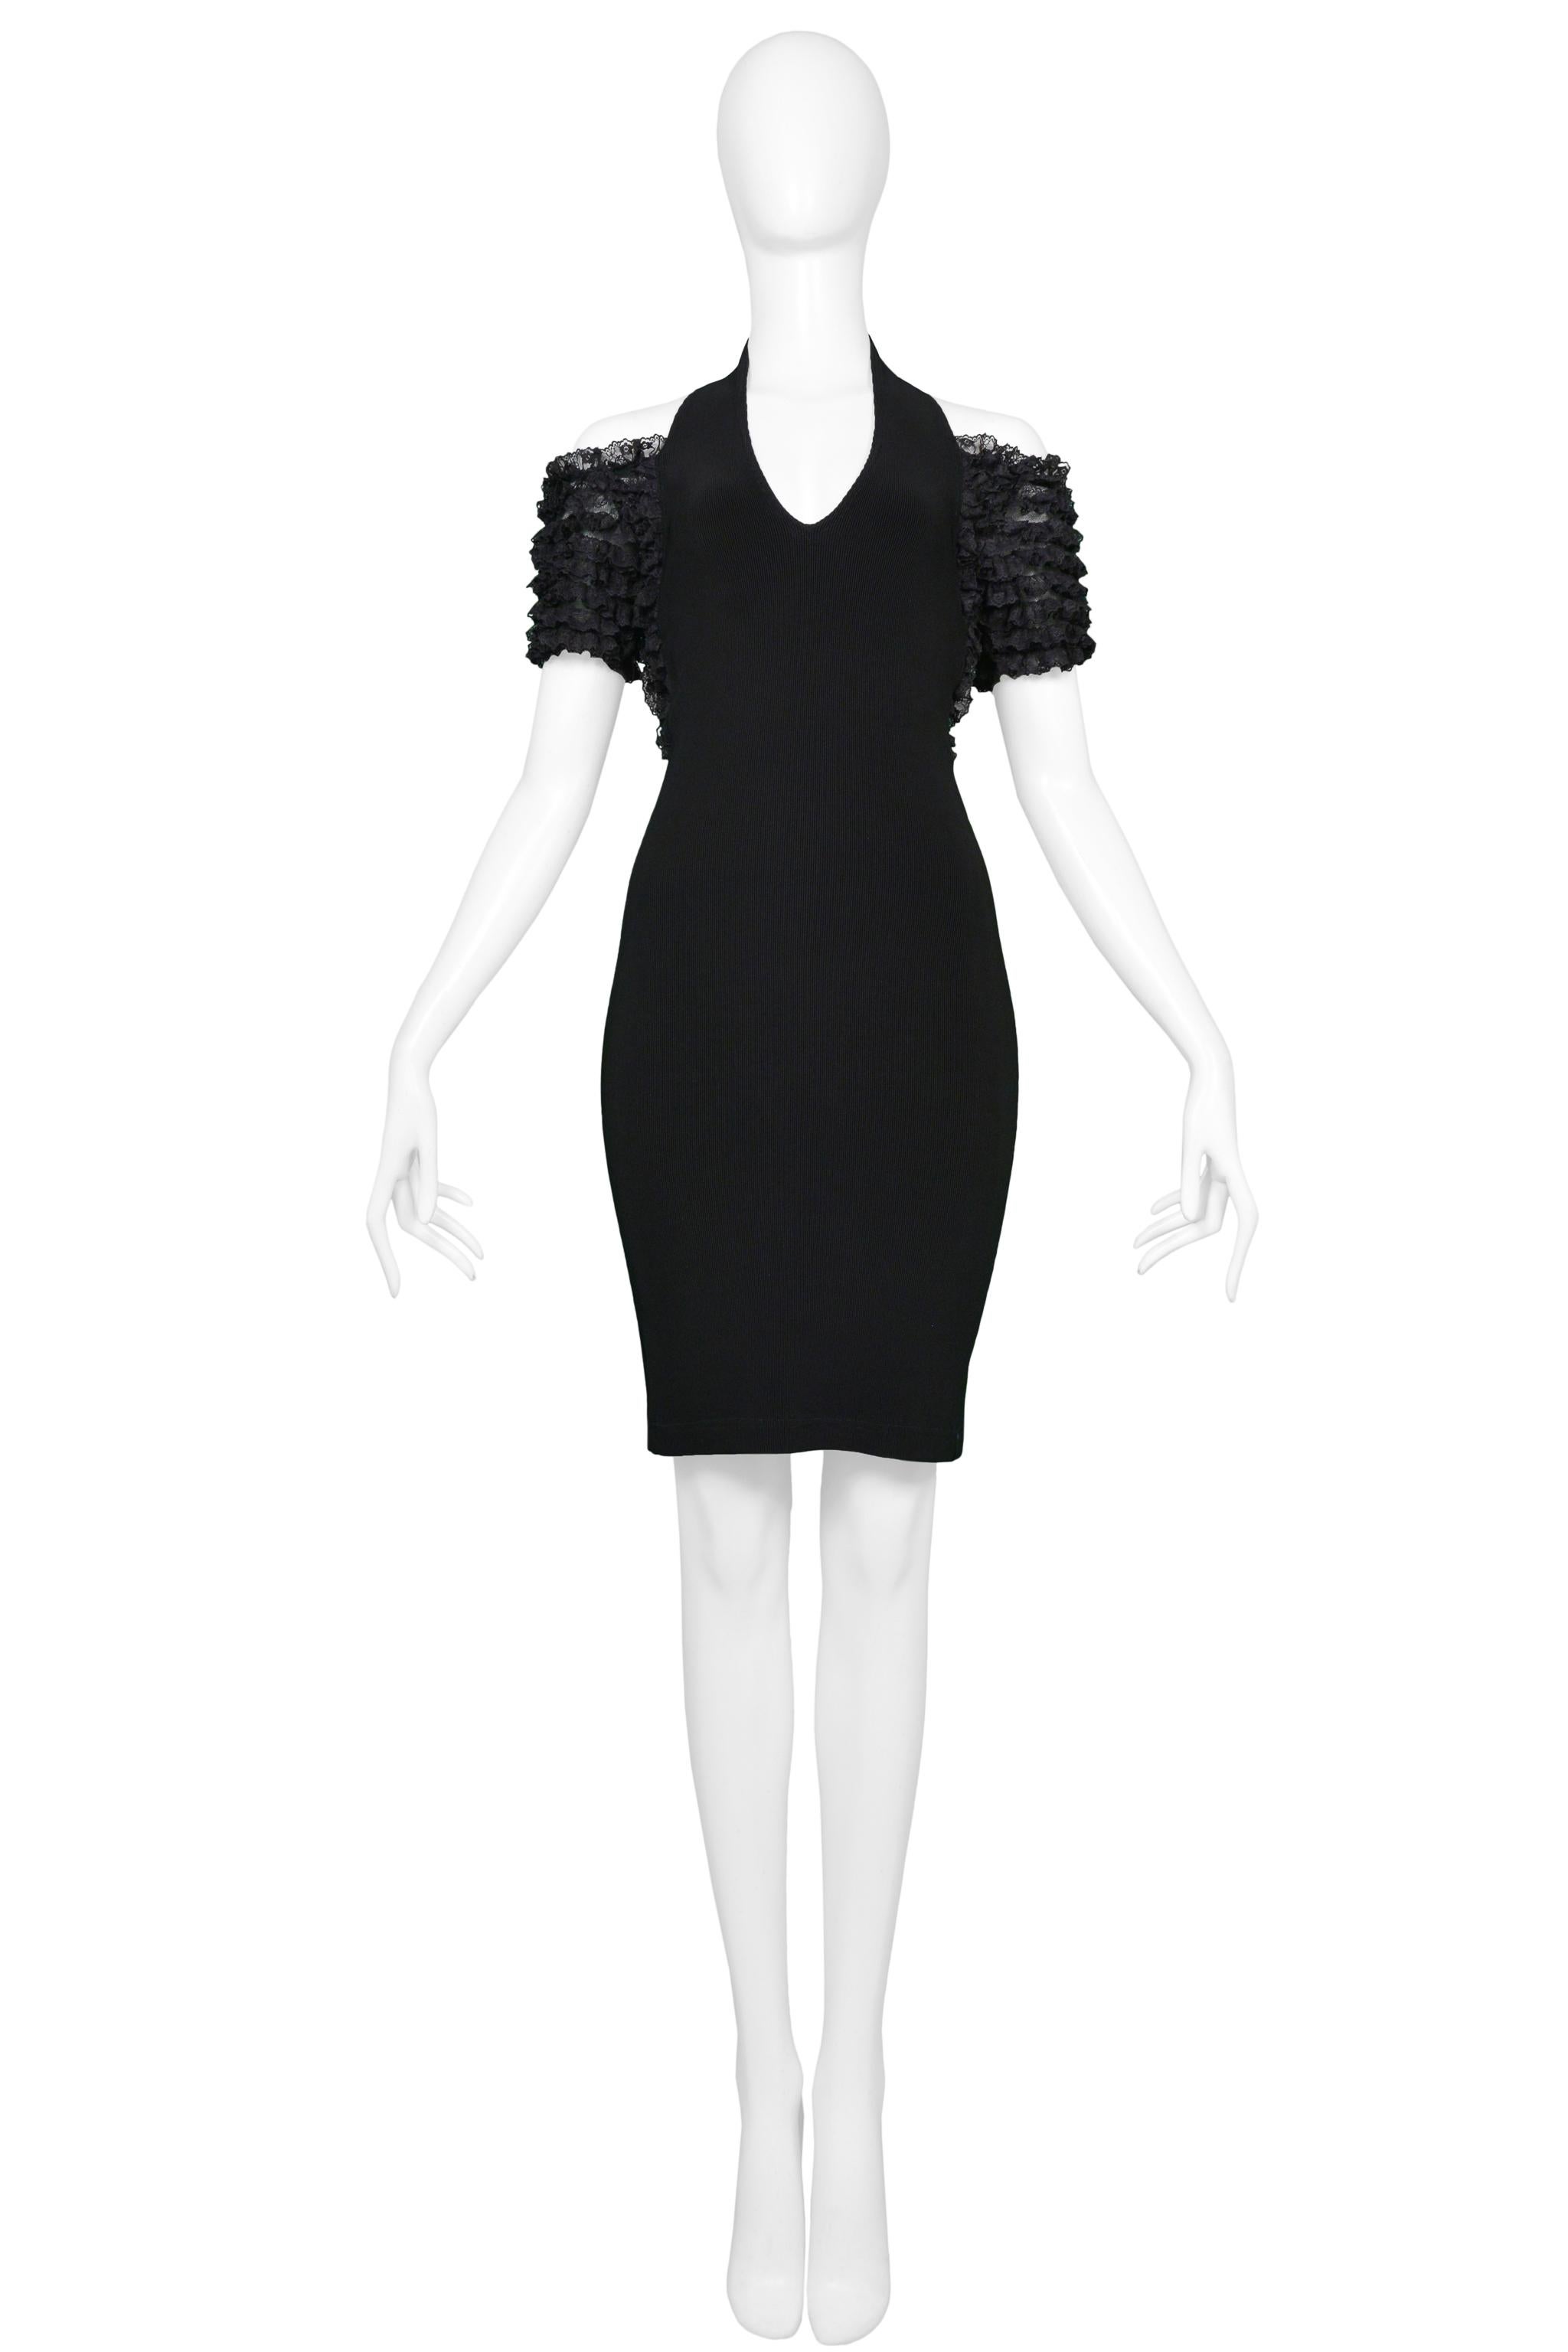 Chantal Thomass Black Bodycon Halter Dress With Ruffles 1992 In Excellent Condition For Sale In Los Angeles, CA